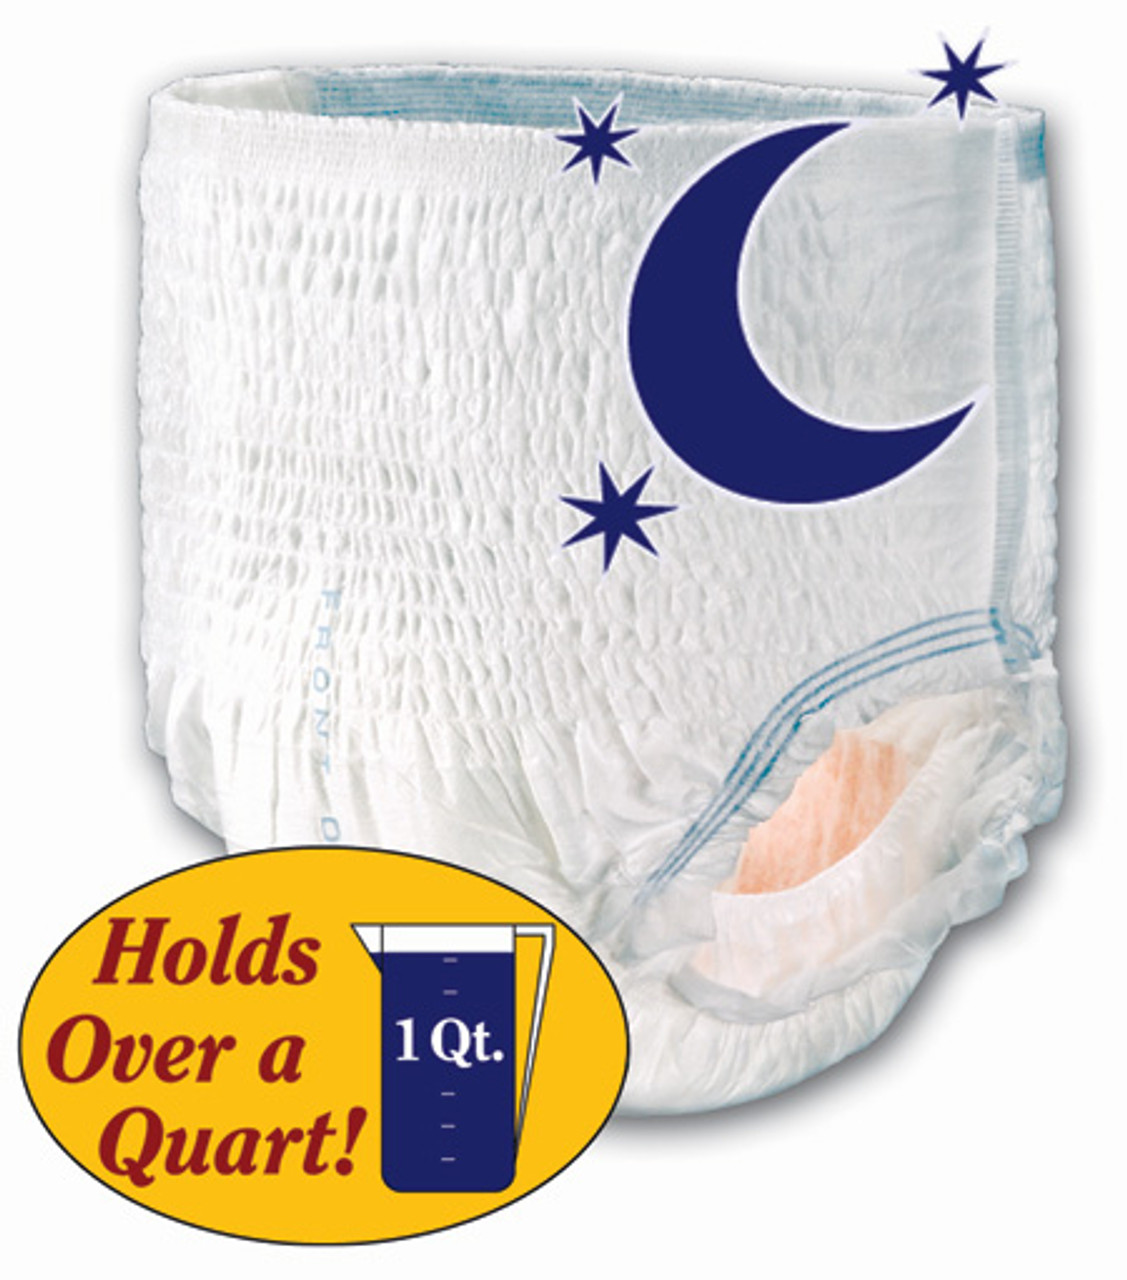 Tranquility Premium OverNight Disposable Absorbent Underwear - Adult  Pull-ups